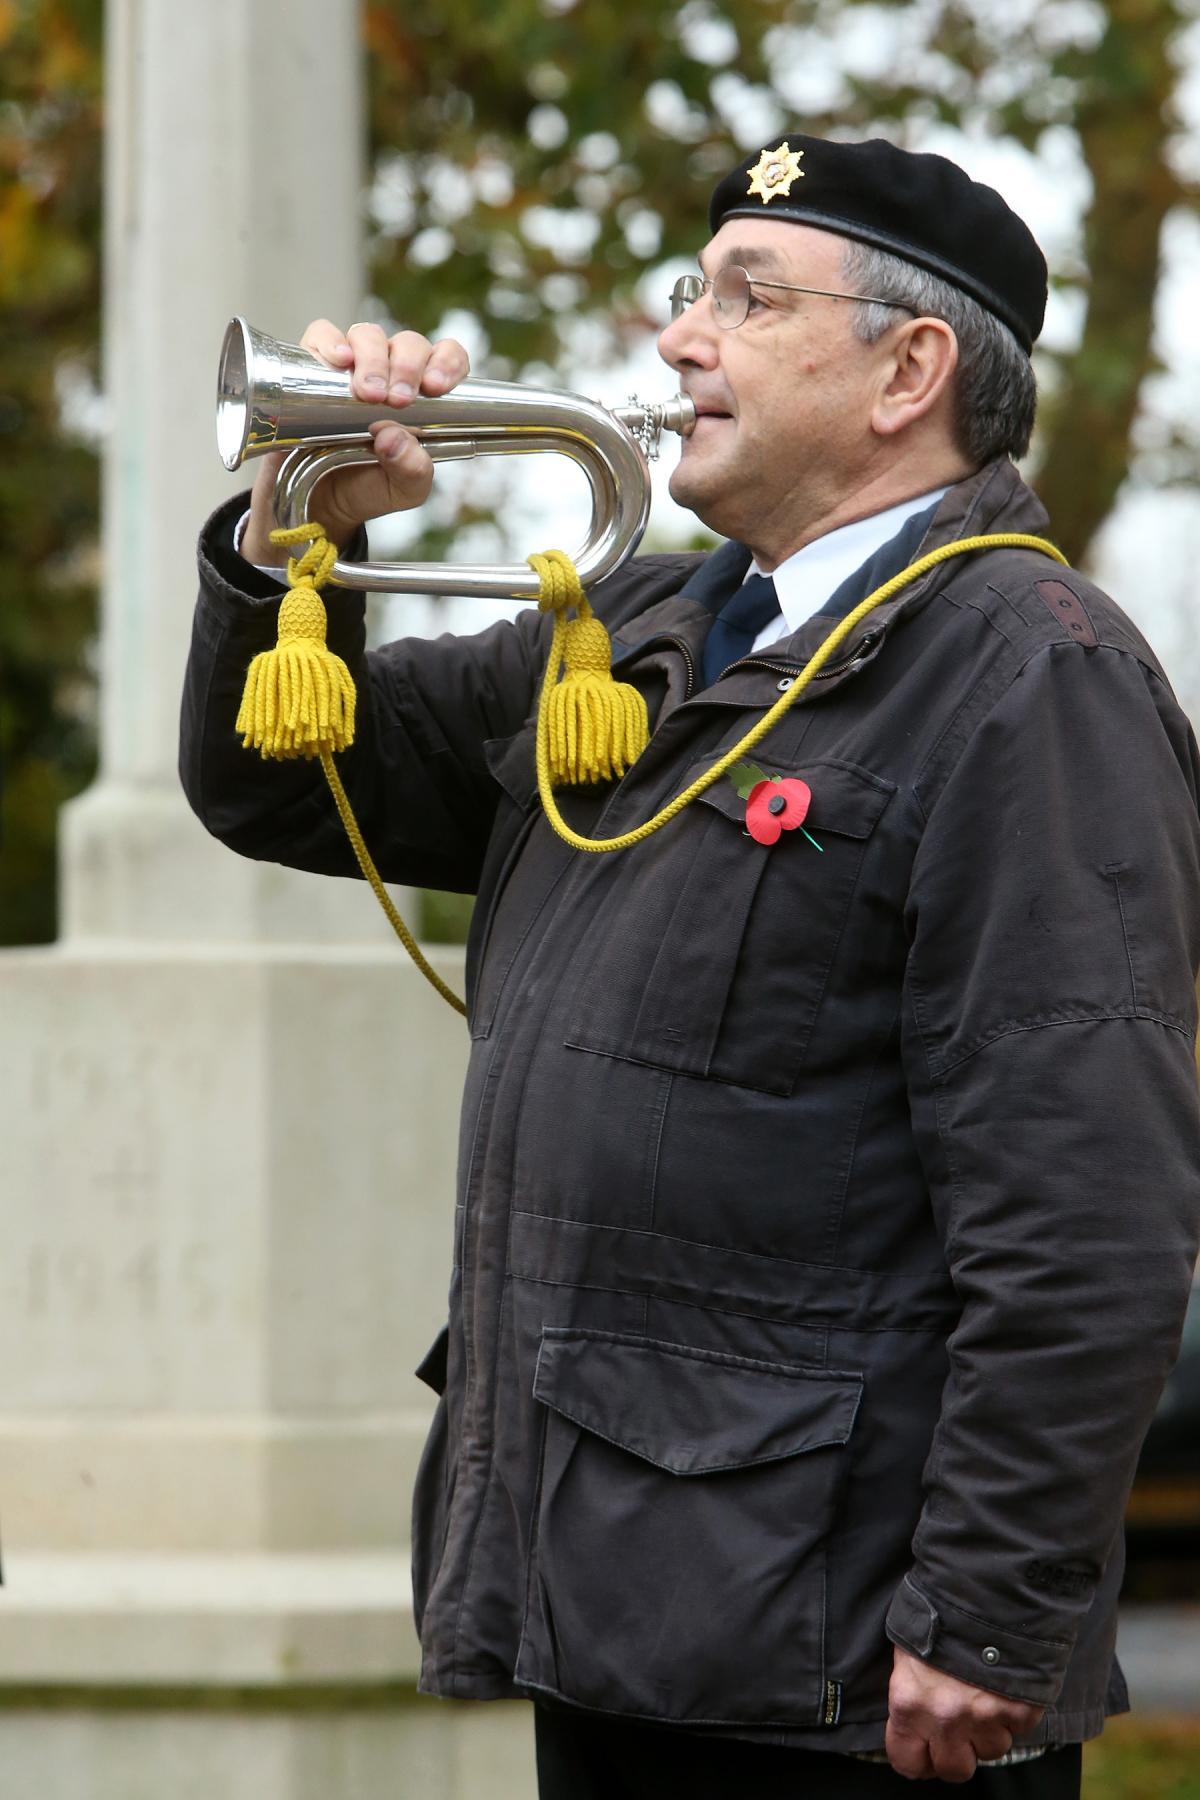 British Legion Remembrance Service at Chingford Mount Cemetery, children from Chingford Foundation, Parkside, Rushcroft and Chace Community from Enfield placed flowers over 200 graves. (6/11/2015) EL86105_2